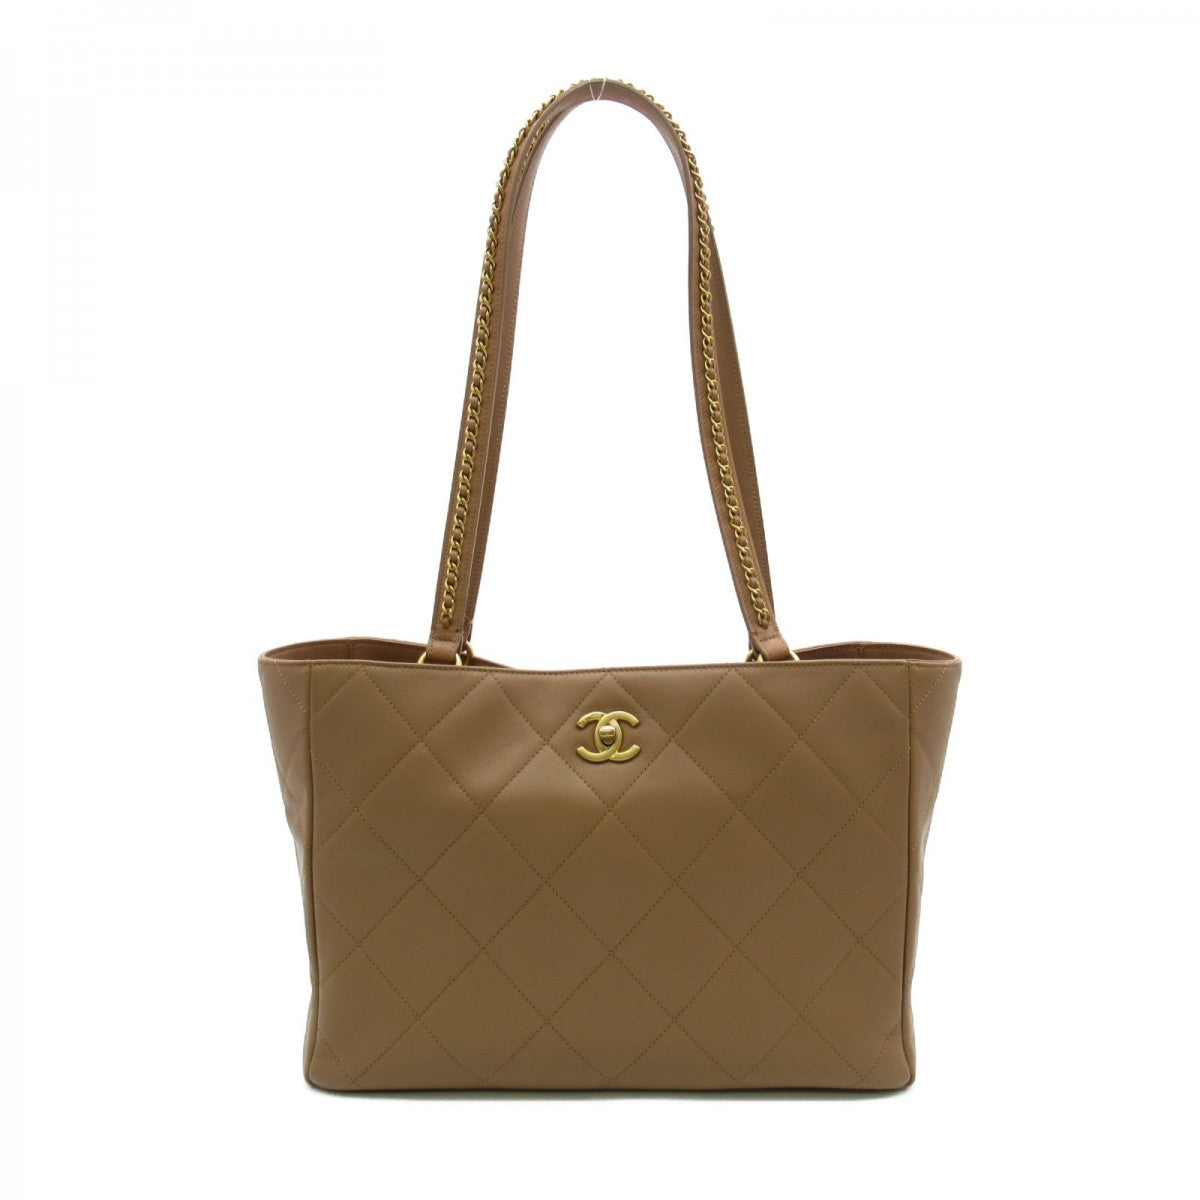 CC Quilted Leather Tote Bag